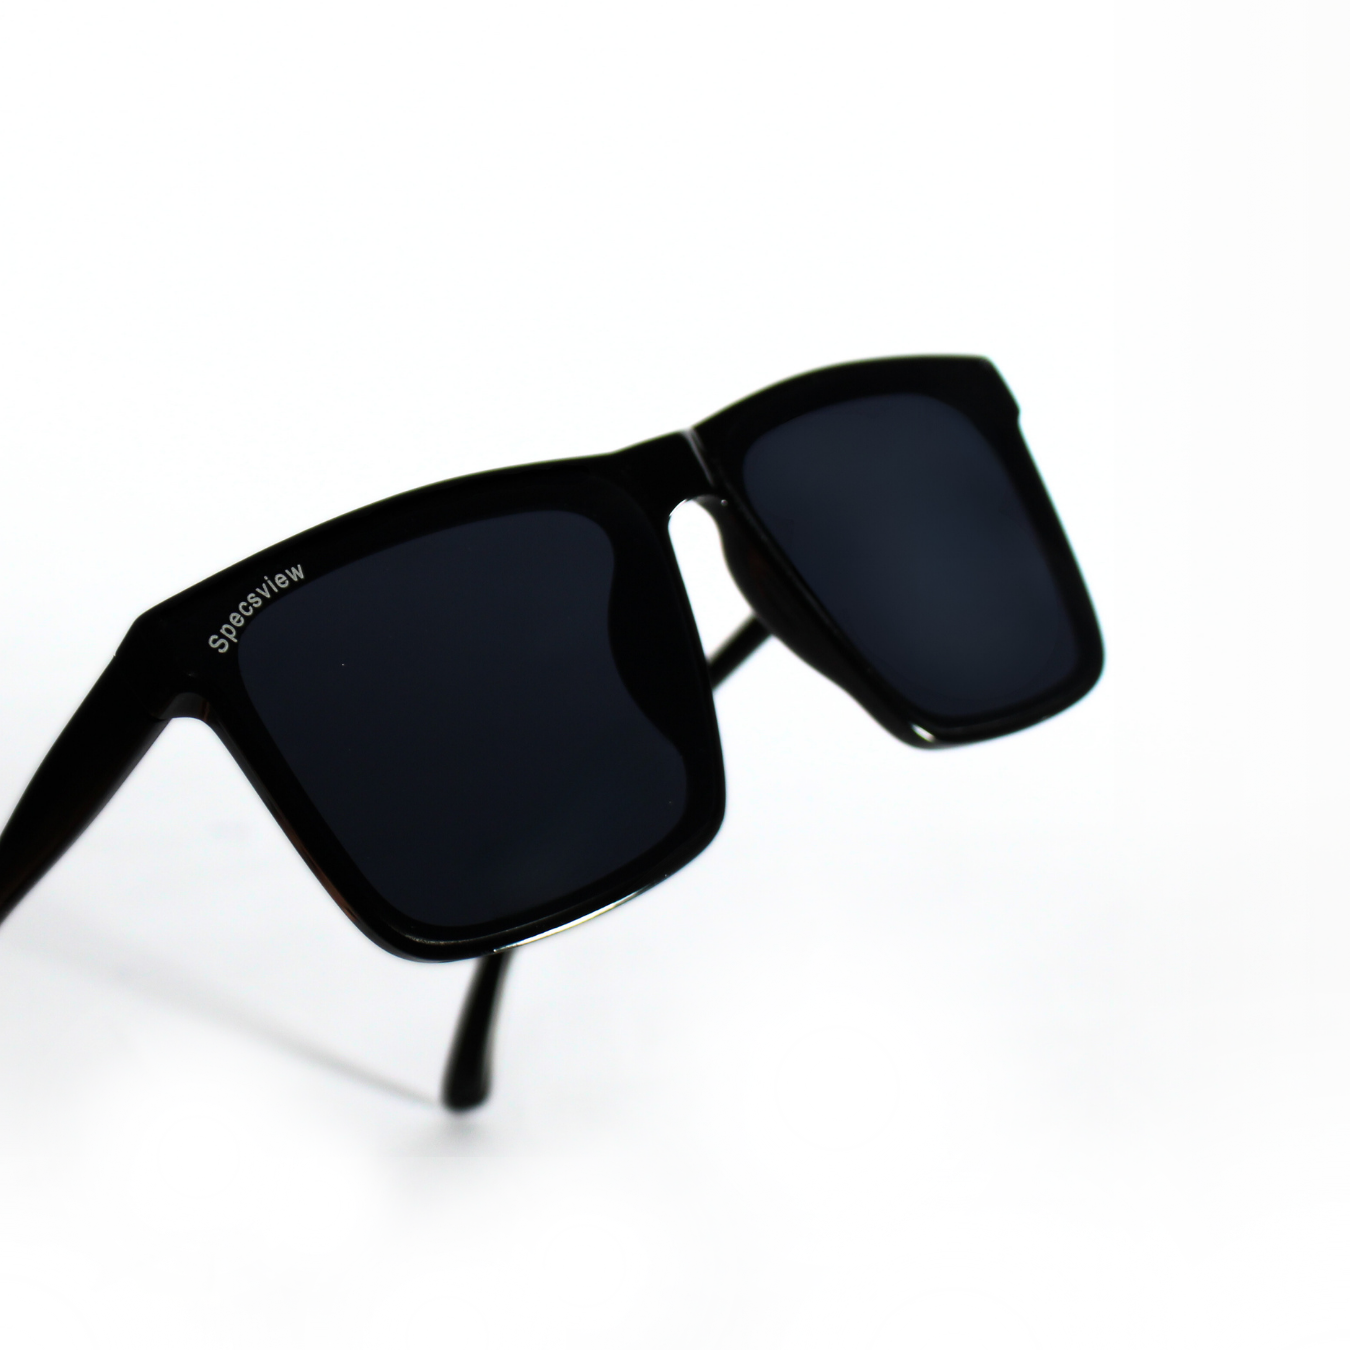 KARL//001 I Sunglasses for Men and Women - Specsview